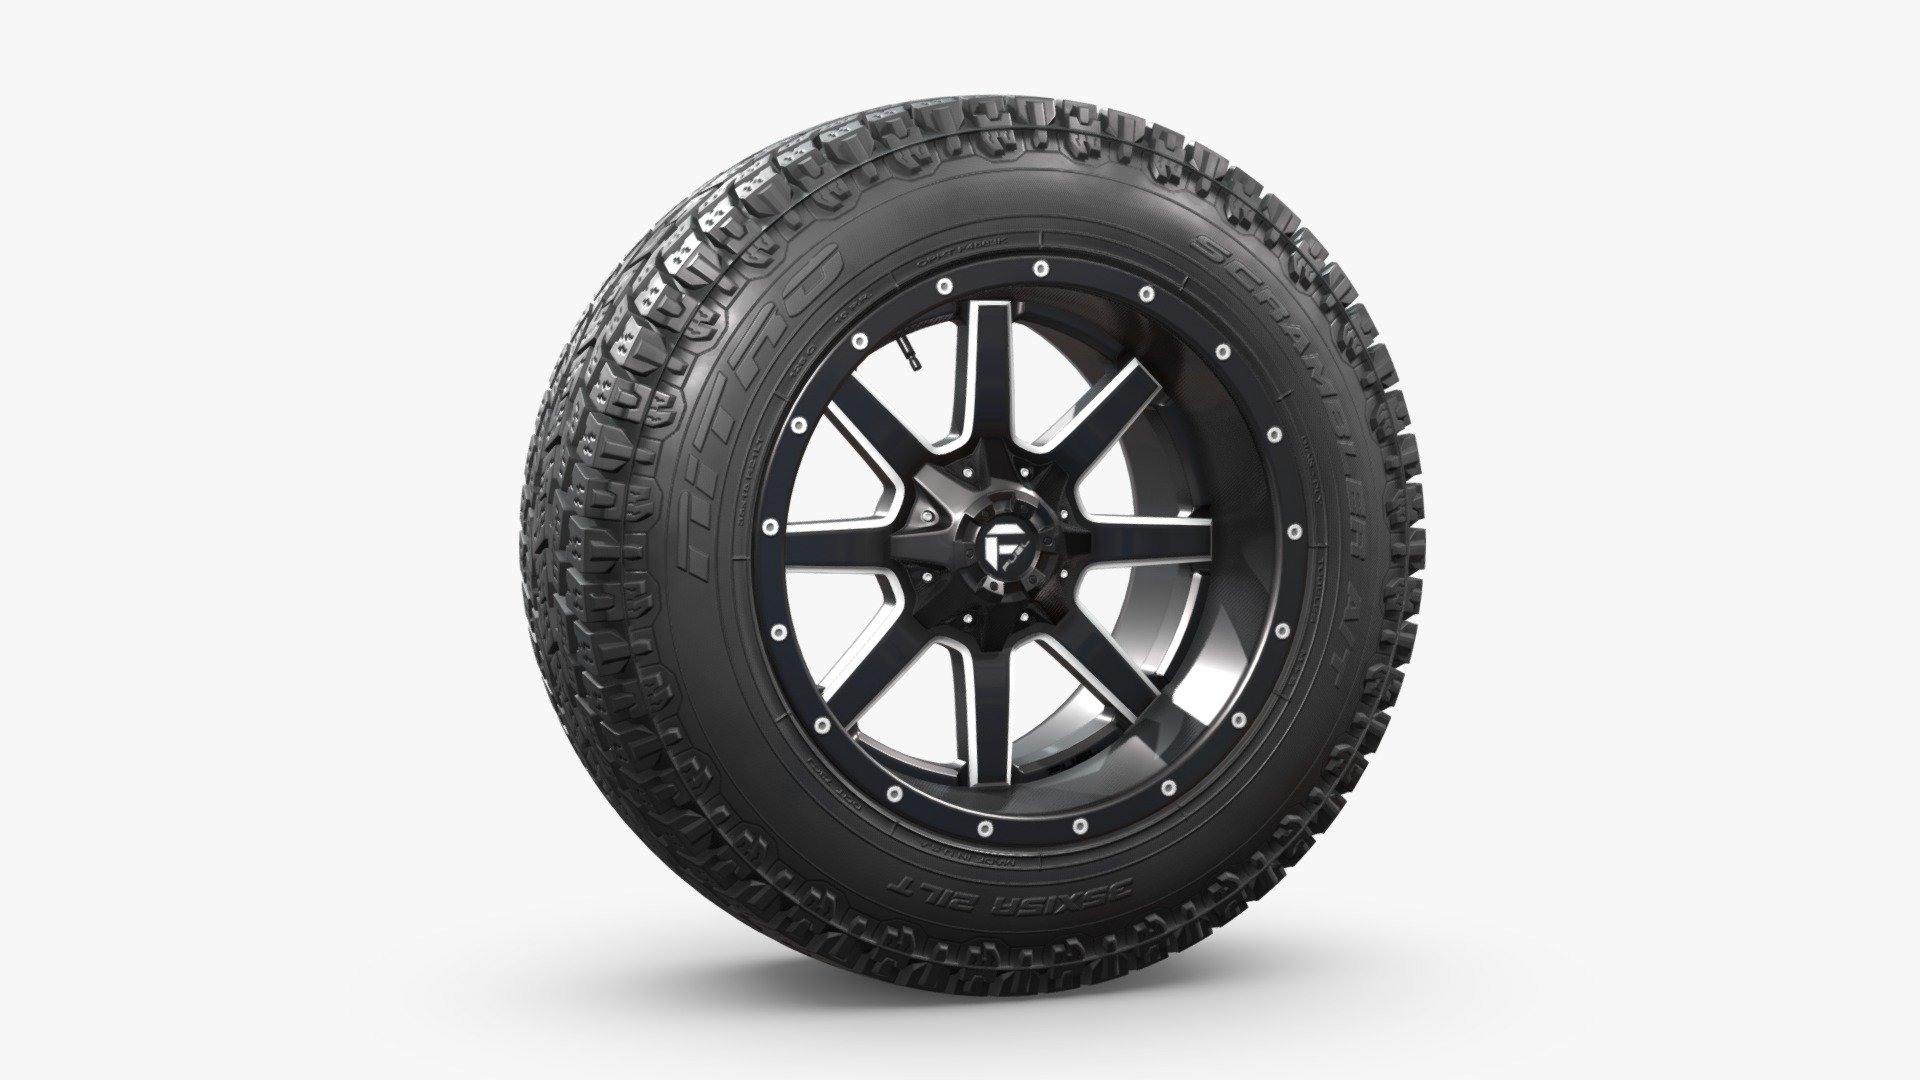 3D model of an off road wheel and tire combo.

The model is fully textured and was created with 3DS Max 2016 using the open subdivision modifier which has been left in the stack. There is also a Blender version.

The model has 48.000 polygons with subdivision level at 0 and 192.000 at level 1.

FBX, OBJ and 3DS files have been included in separated HI and LO subdivision versions.

Renderer: V Ray and Cycles.

All materials and textures are included and mapped in all files, settings might have to be adjusted depending on the software you are using 3d model